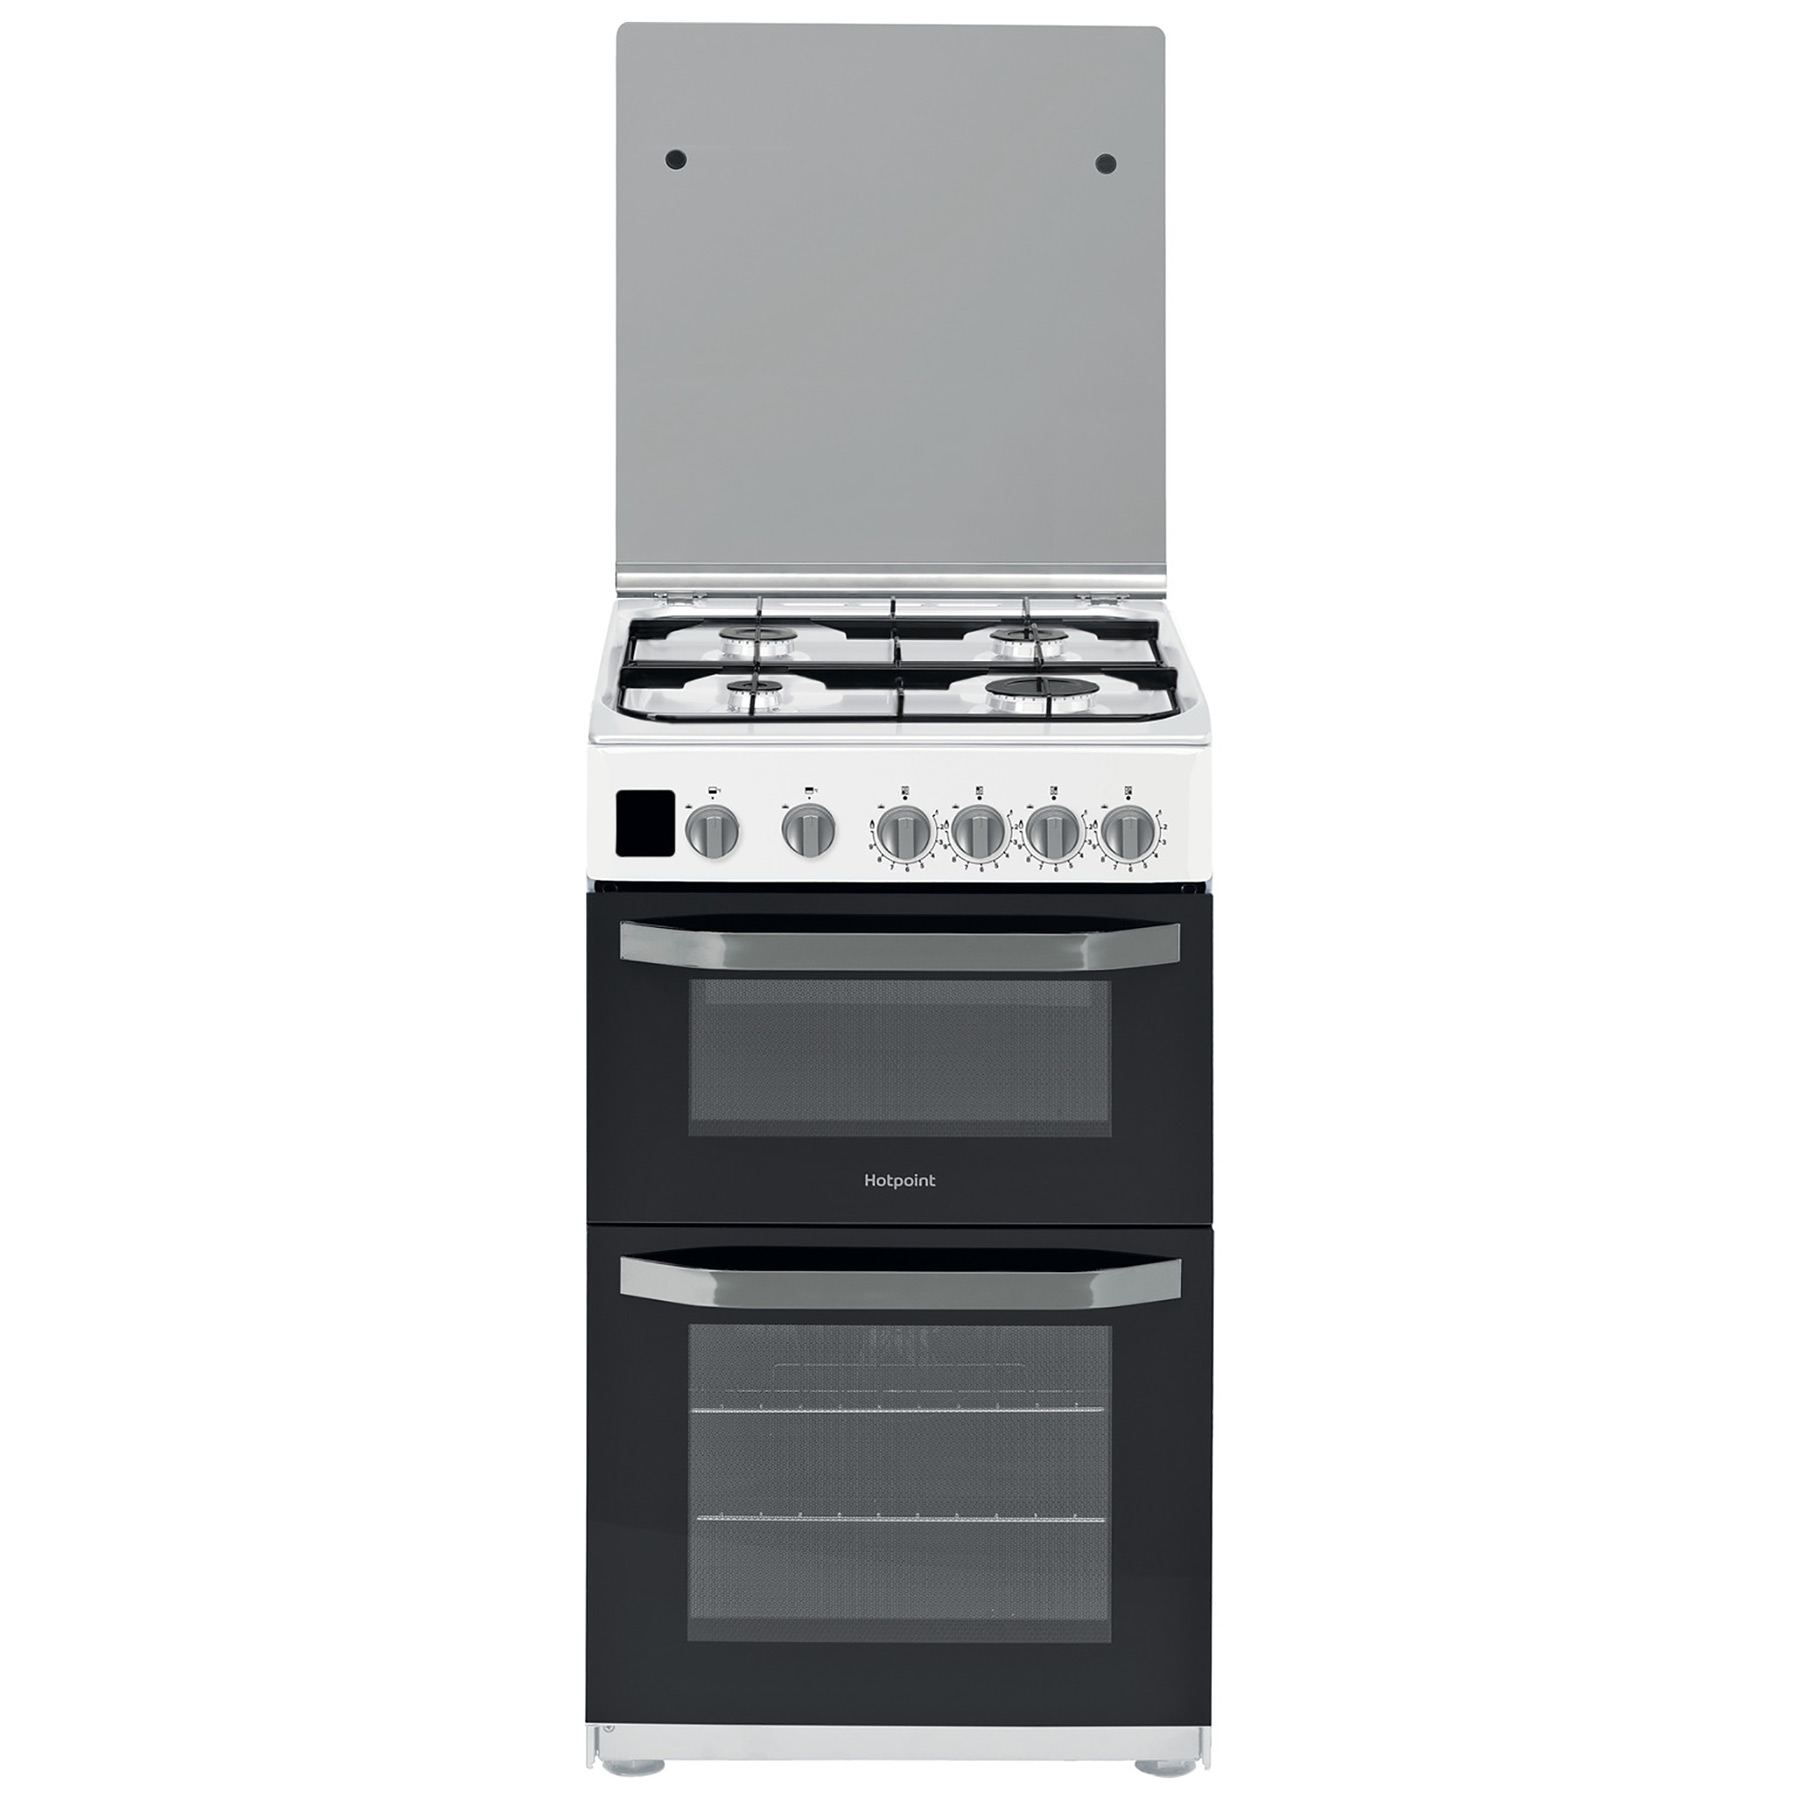 Image of Hotpoint HD5G00CCW 50cm Double Oven Gas Cooker in White Catalytic Line